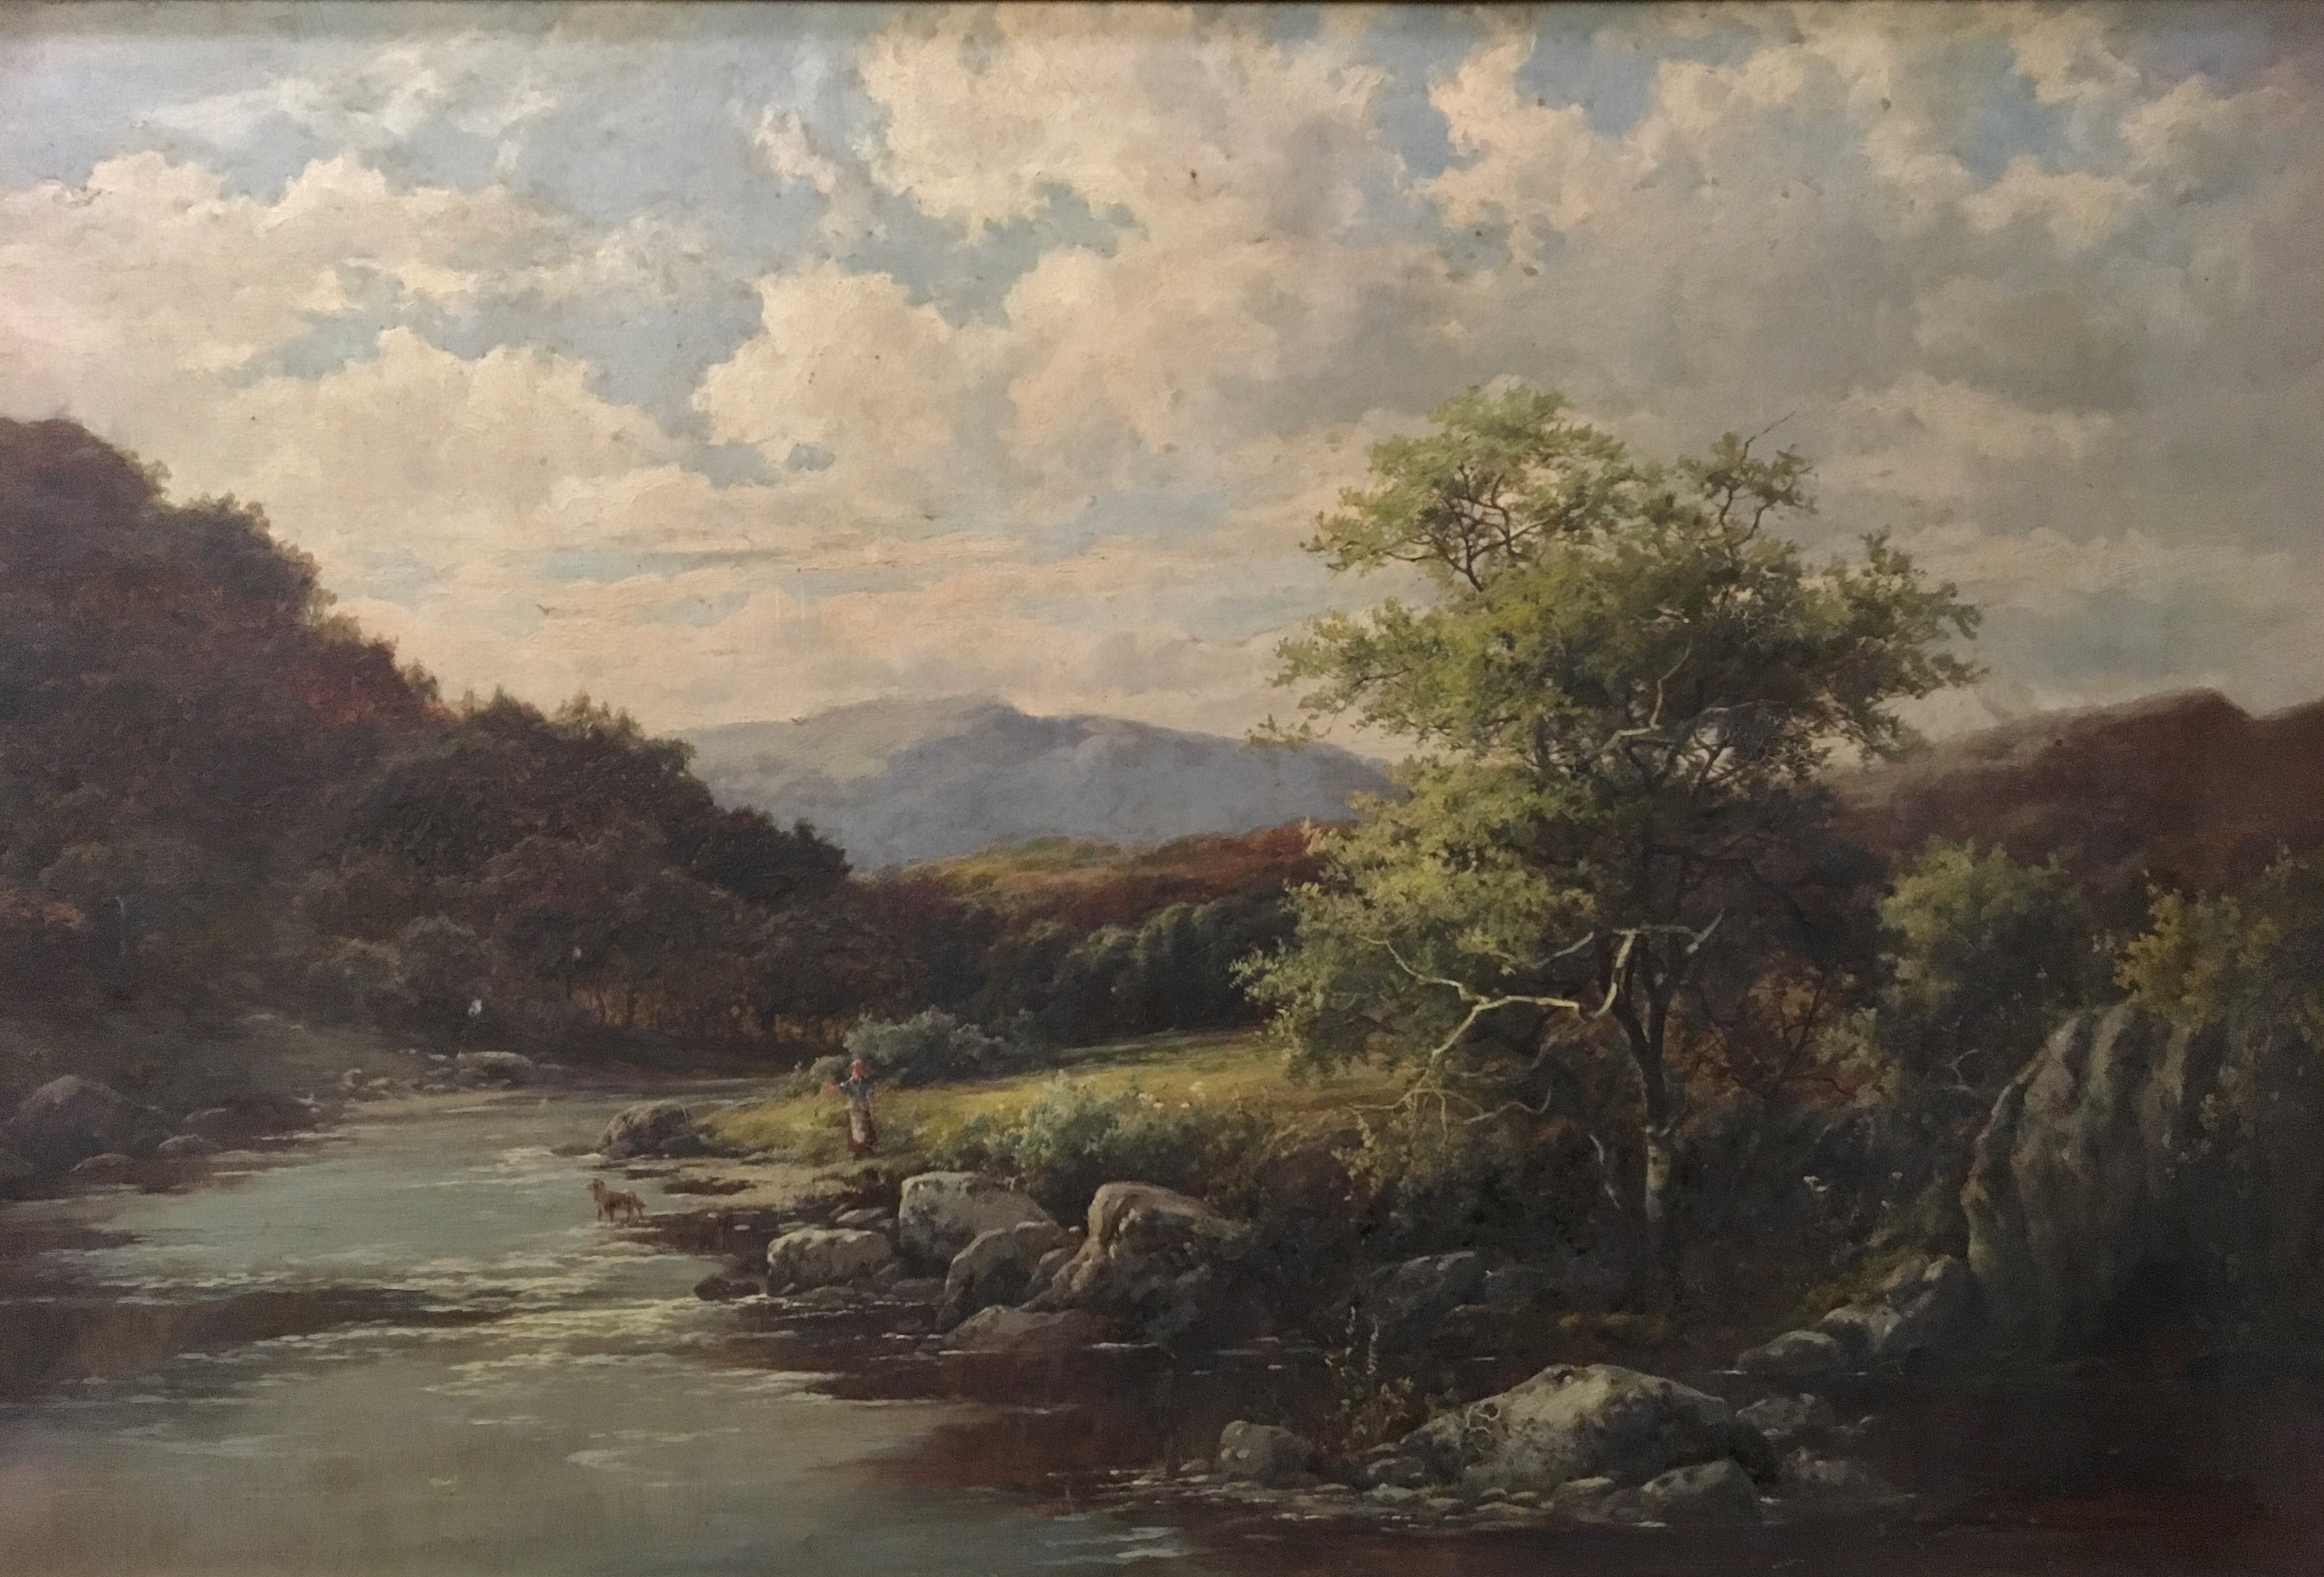 WILLIAM JOSEPH KING. Framed, signed oil on canvas, landscape with figure and dog in river, 59.5cm